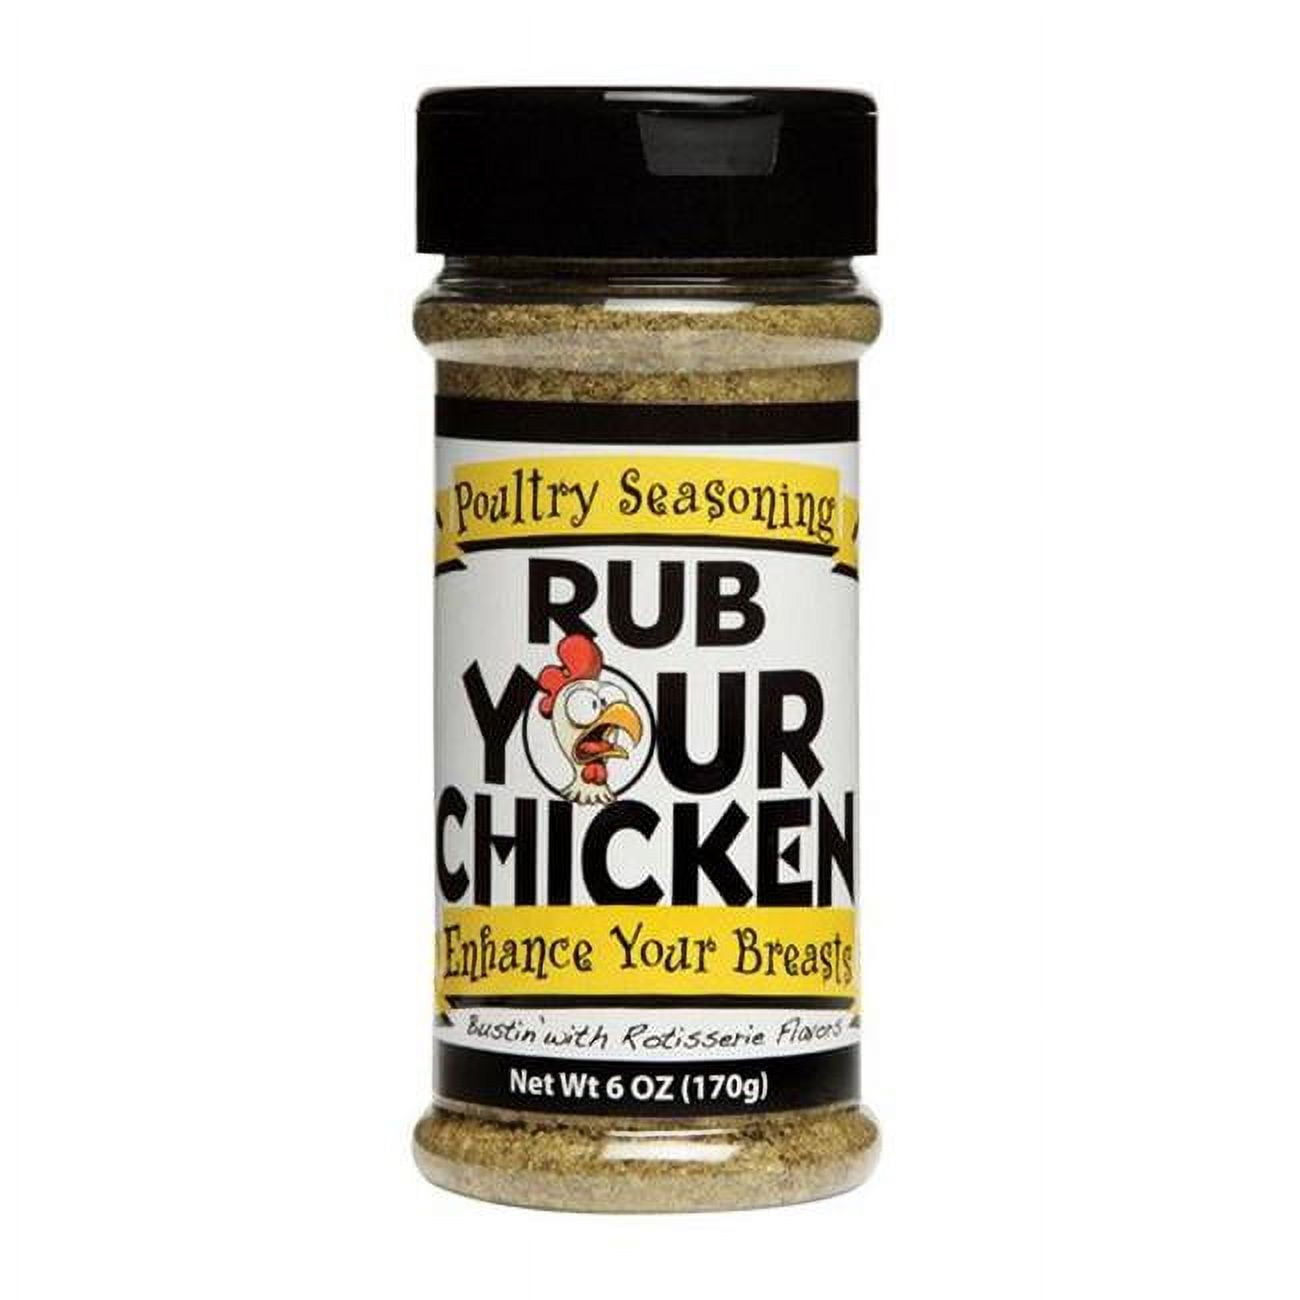 Old World Spices & Seasonings 8439564 6 Oz Rub Your Chicken Poultry